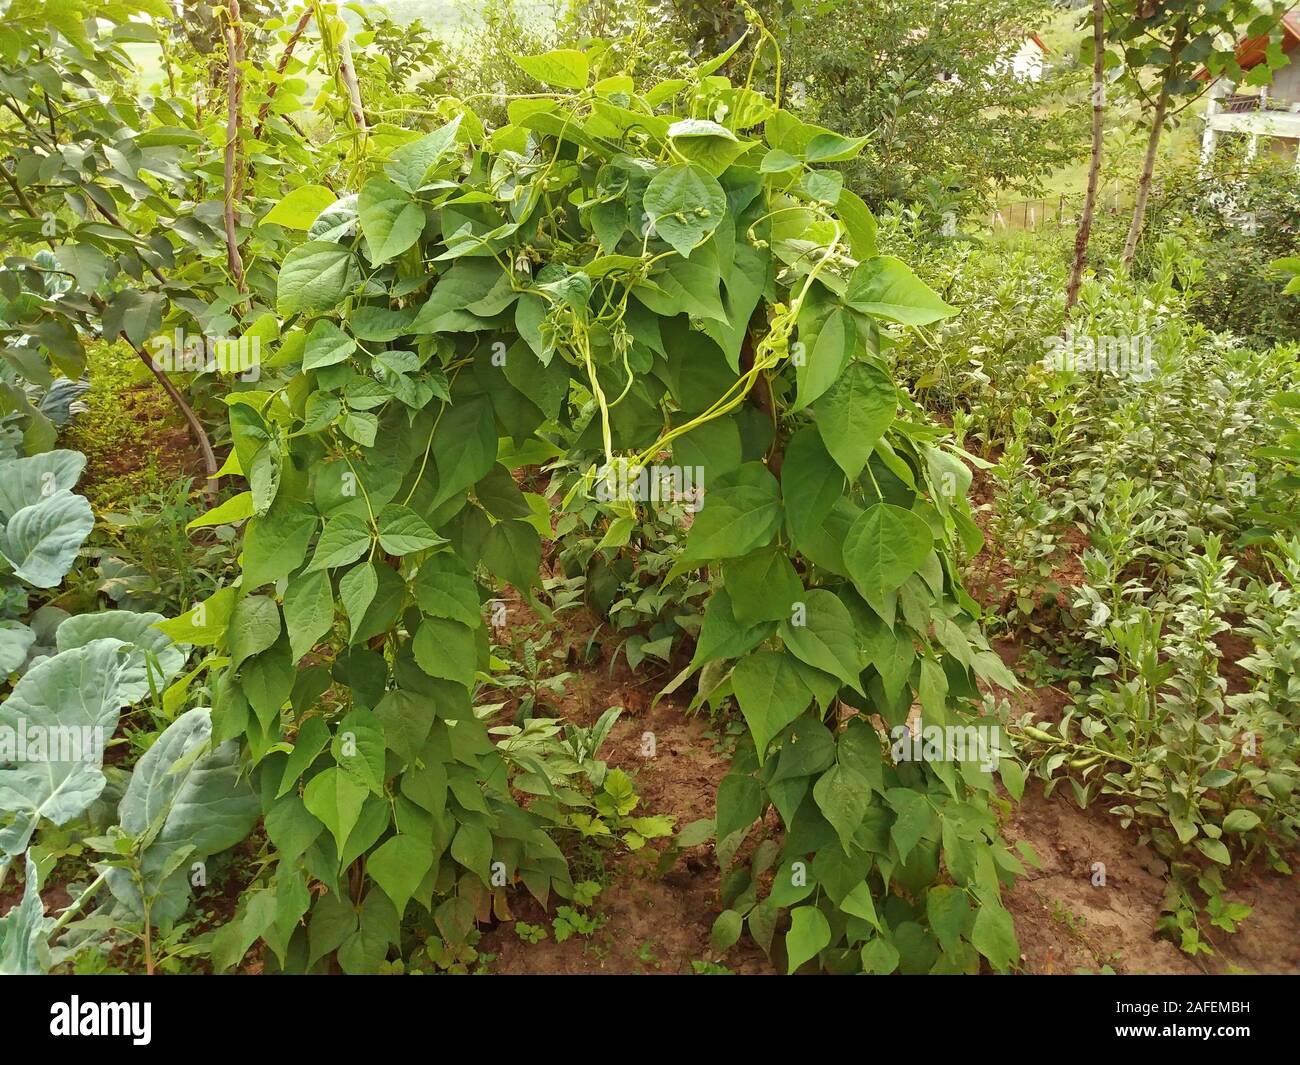 Beans grows in the garden on a wooden stand Stock Photo